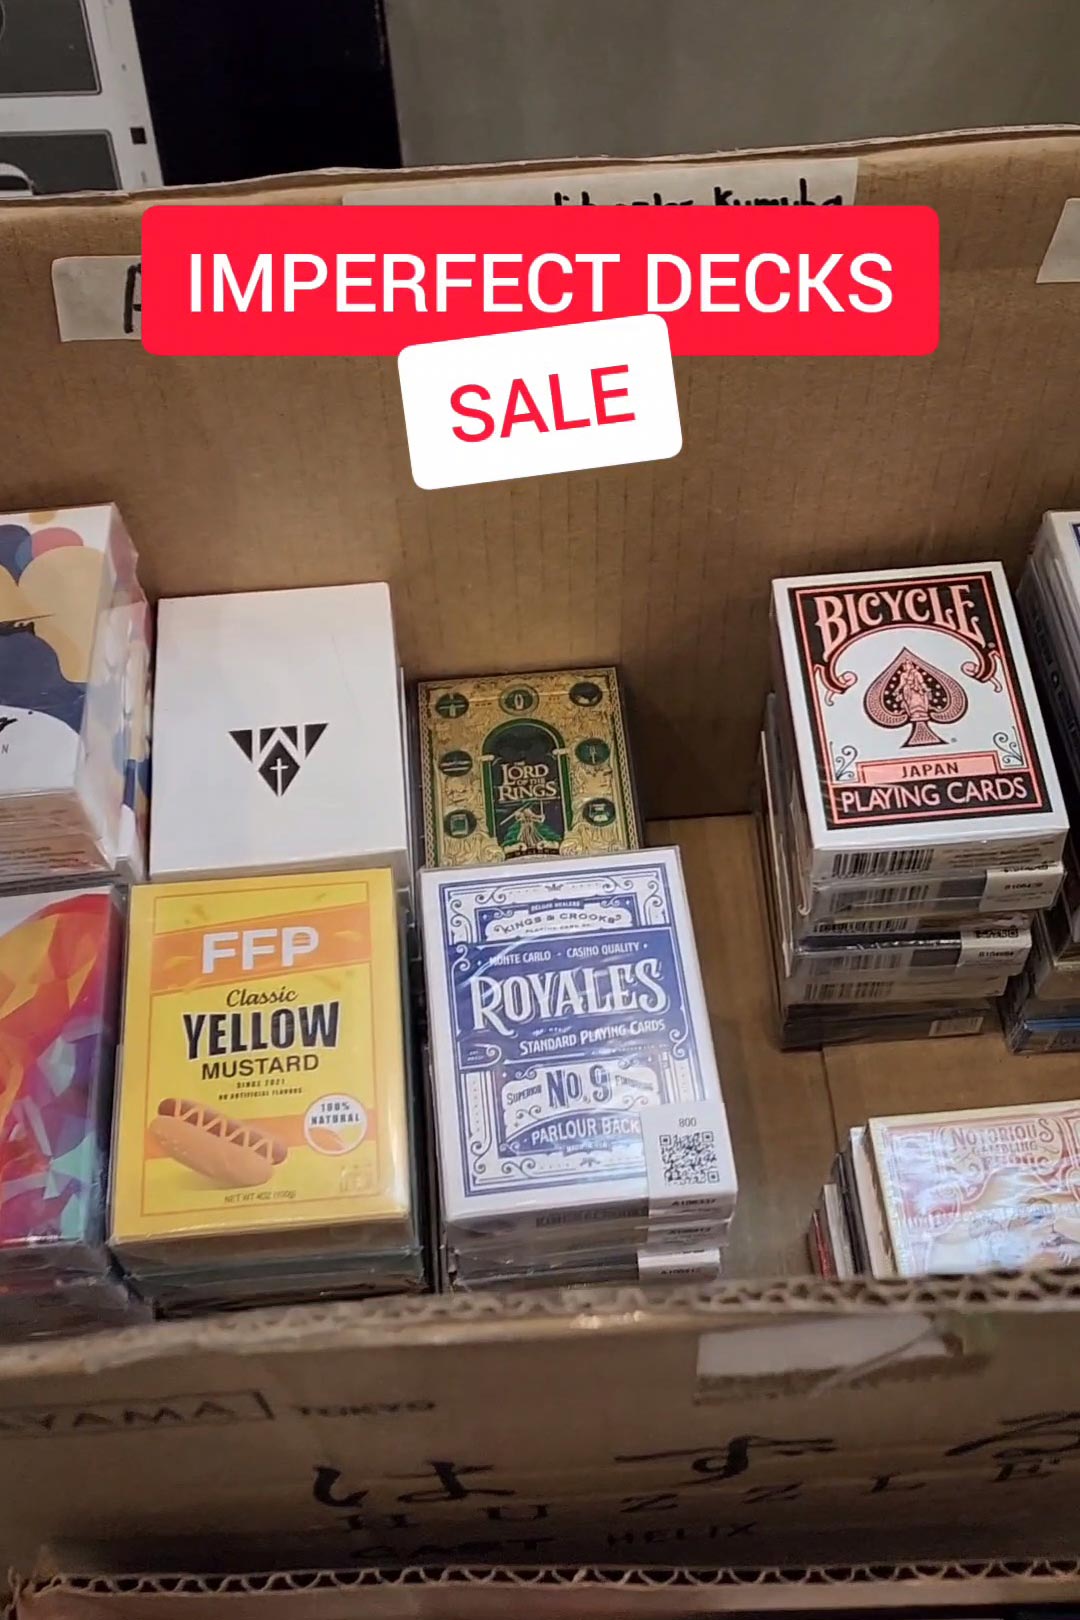 What happens to opened decks?